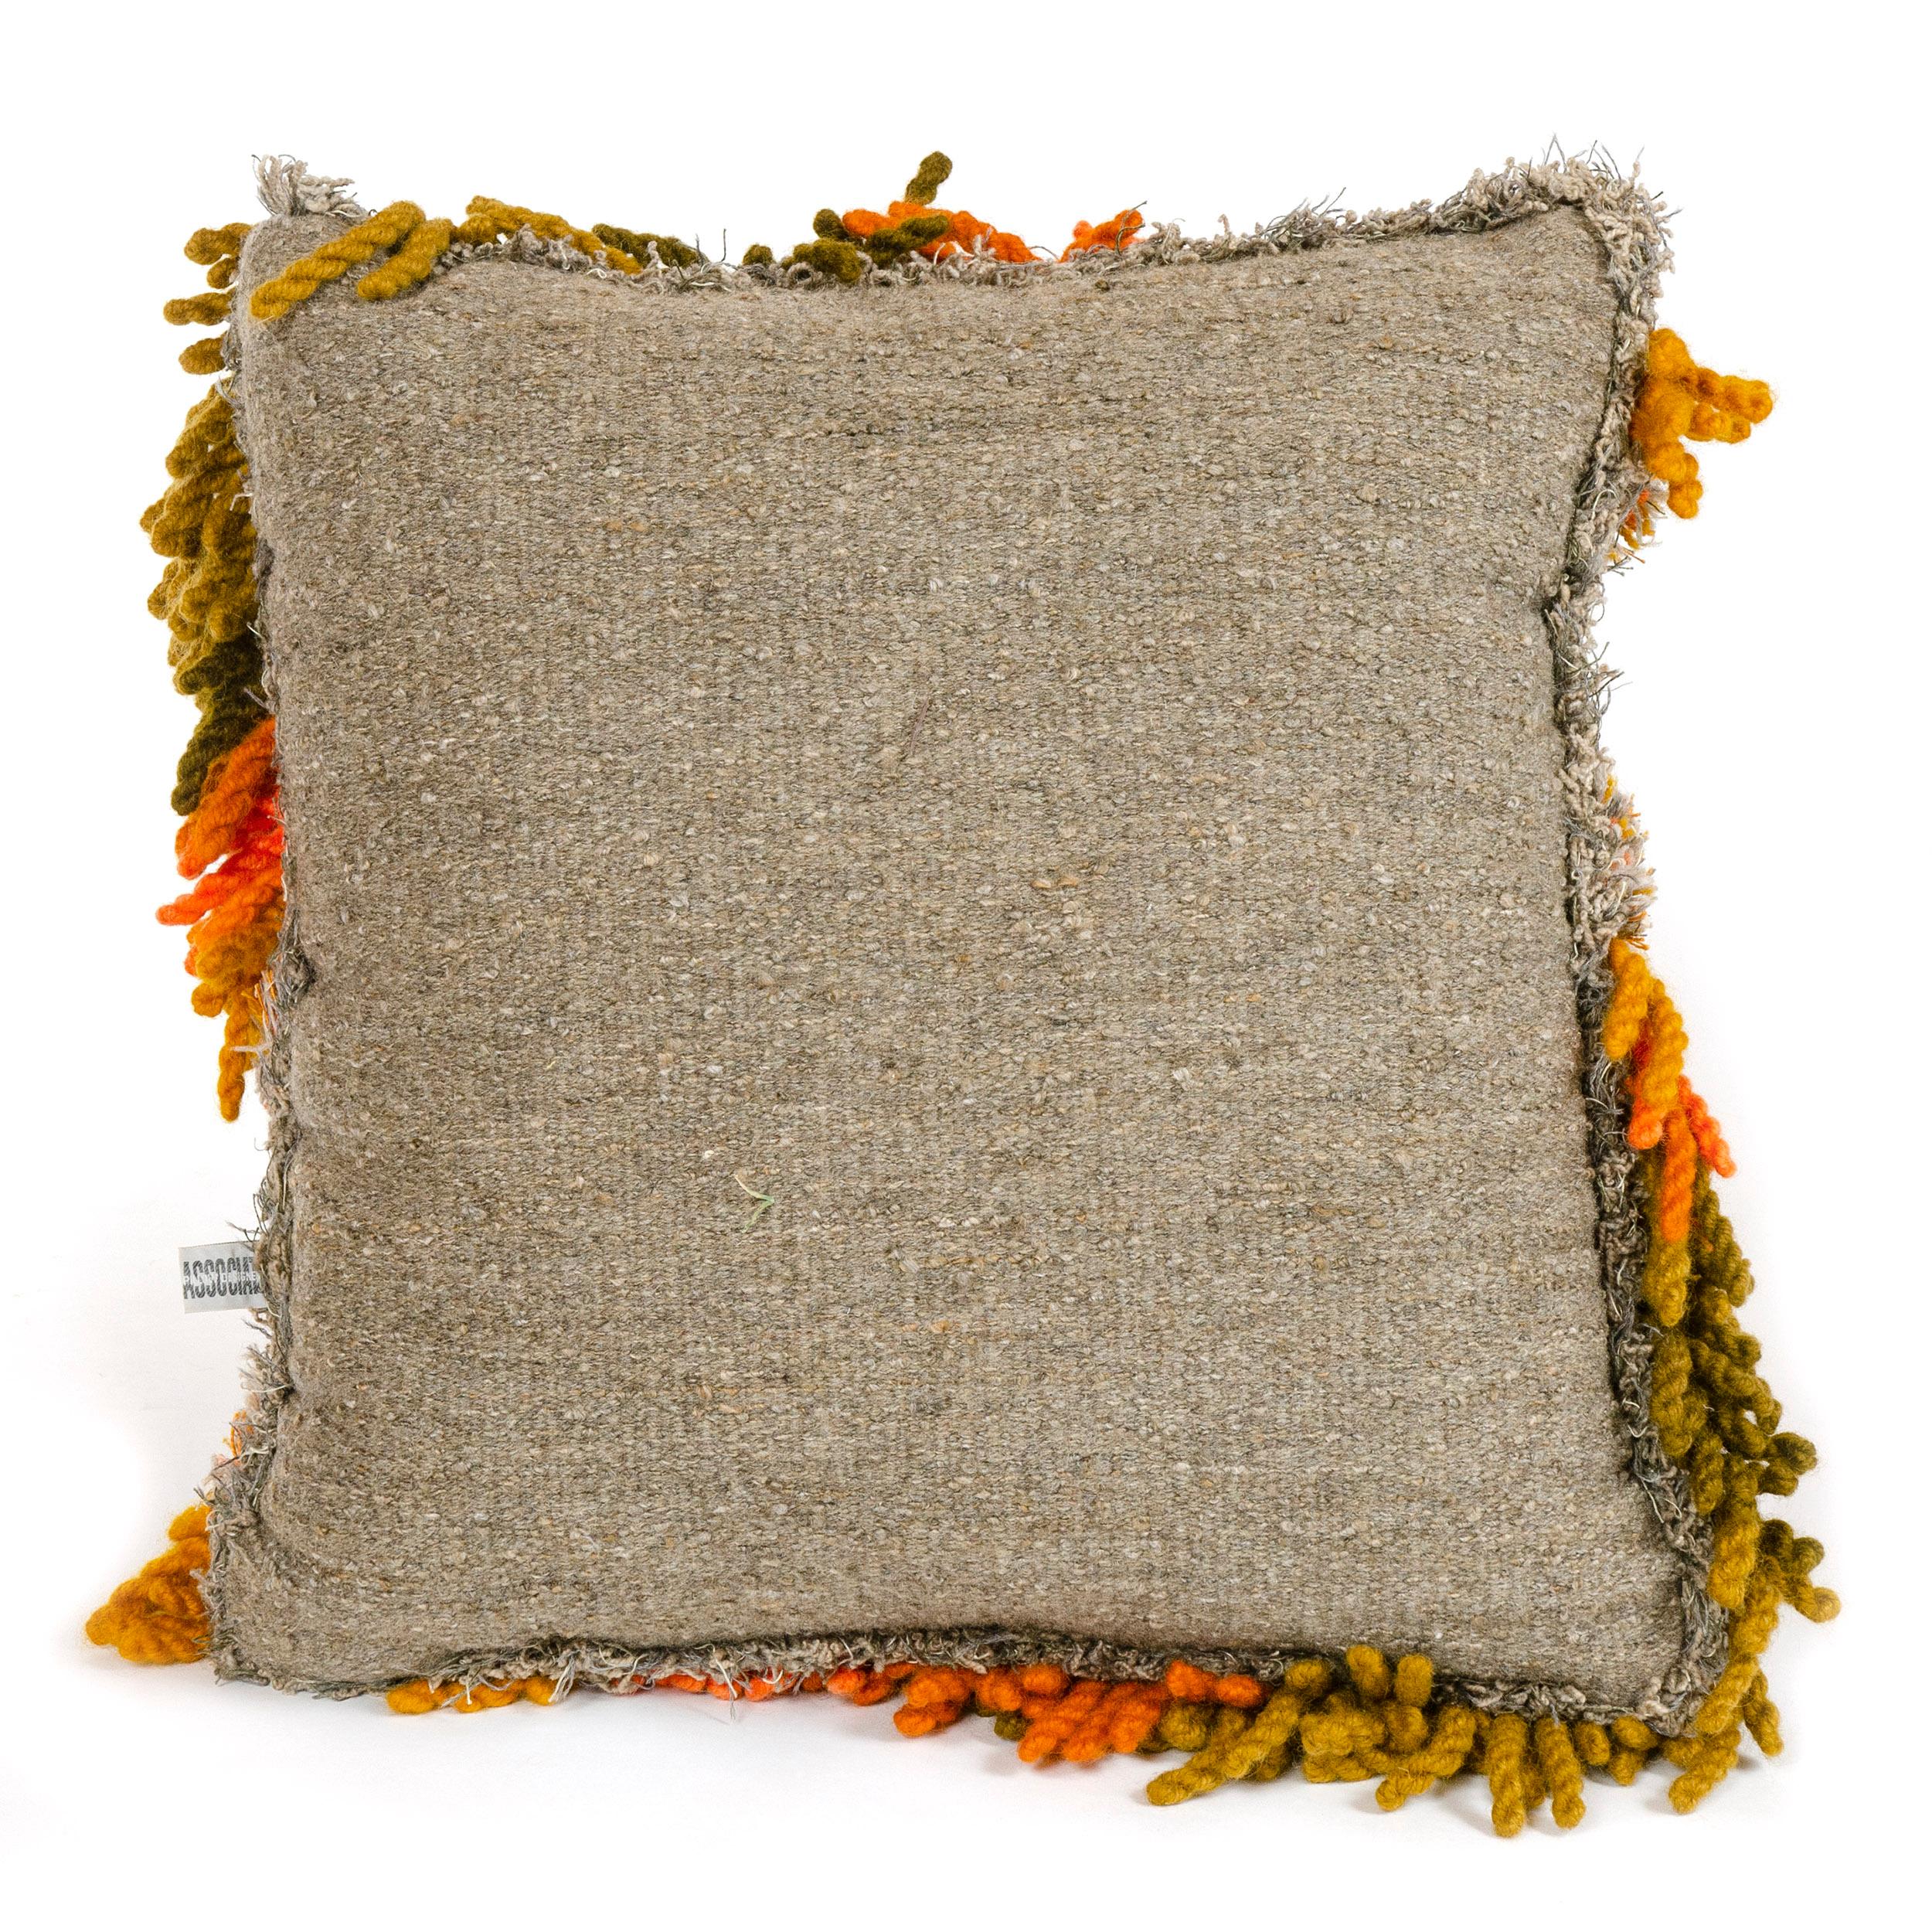 An original handwoven confetti pillow by Robert L. Kidd made with twist yarns of varied color, thickness and length. This pillow was likely displayed at Robert Kidd Gallery, which Kidd co-founded with fellow Cranbrook Academy of Art classmate Ray